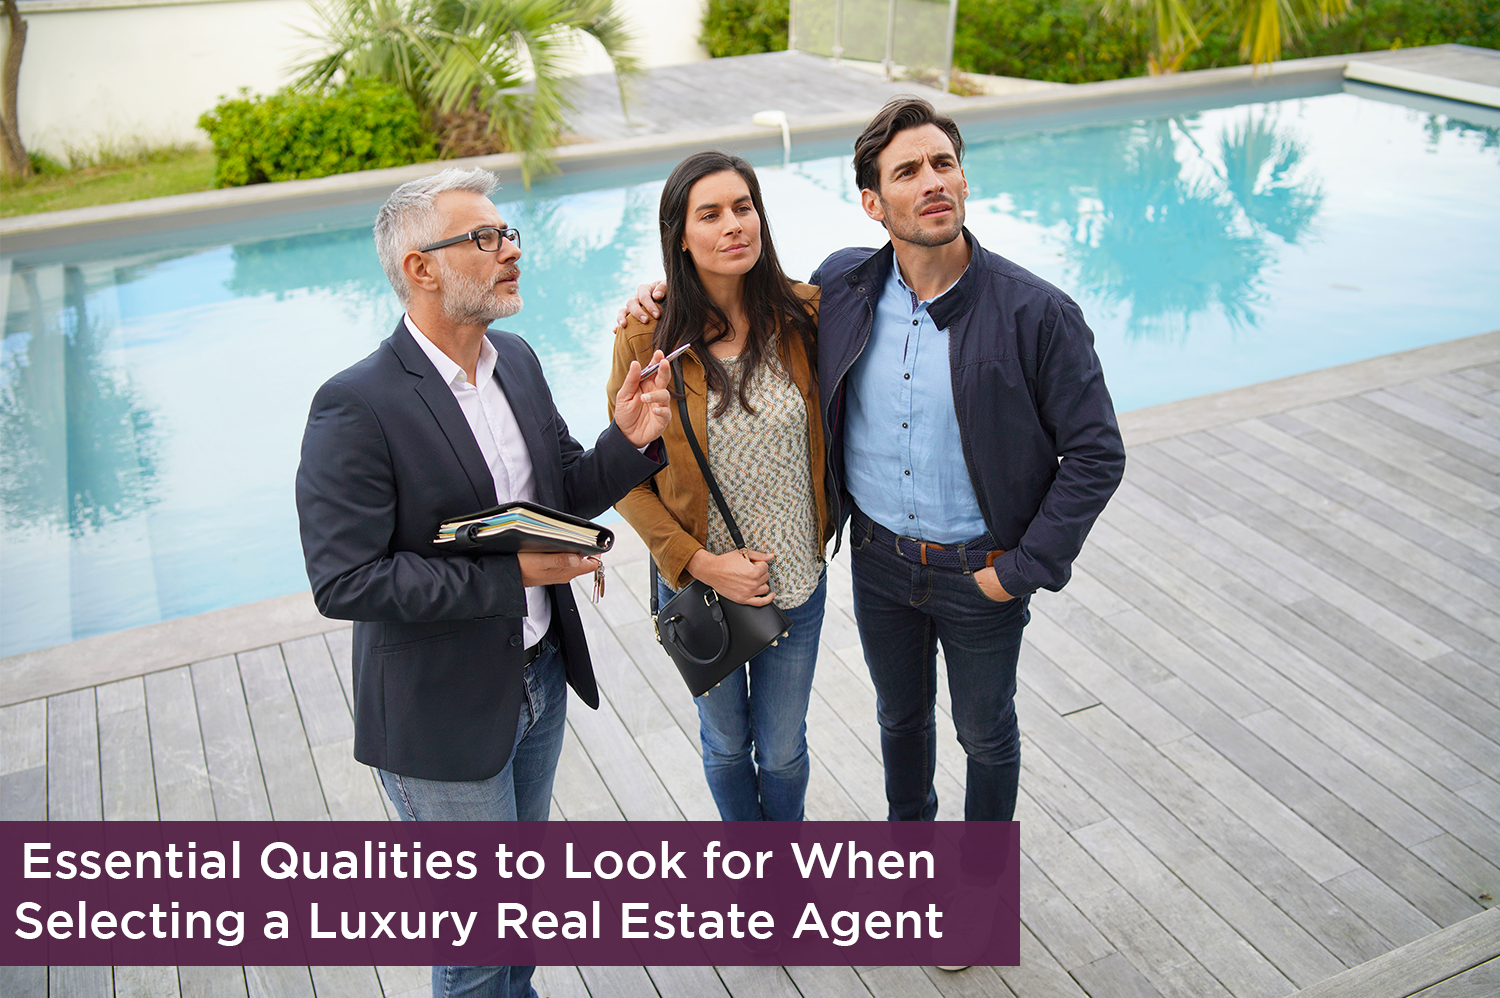 A luxury real estate agent standing outside with two clients in front of a pool, looking at a luxury home.